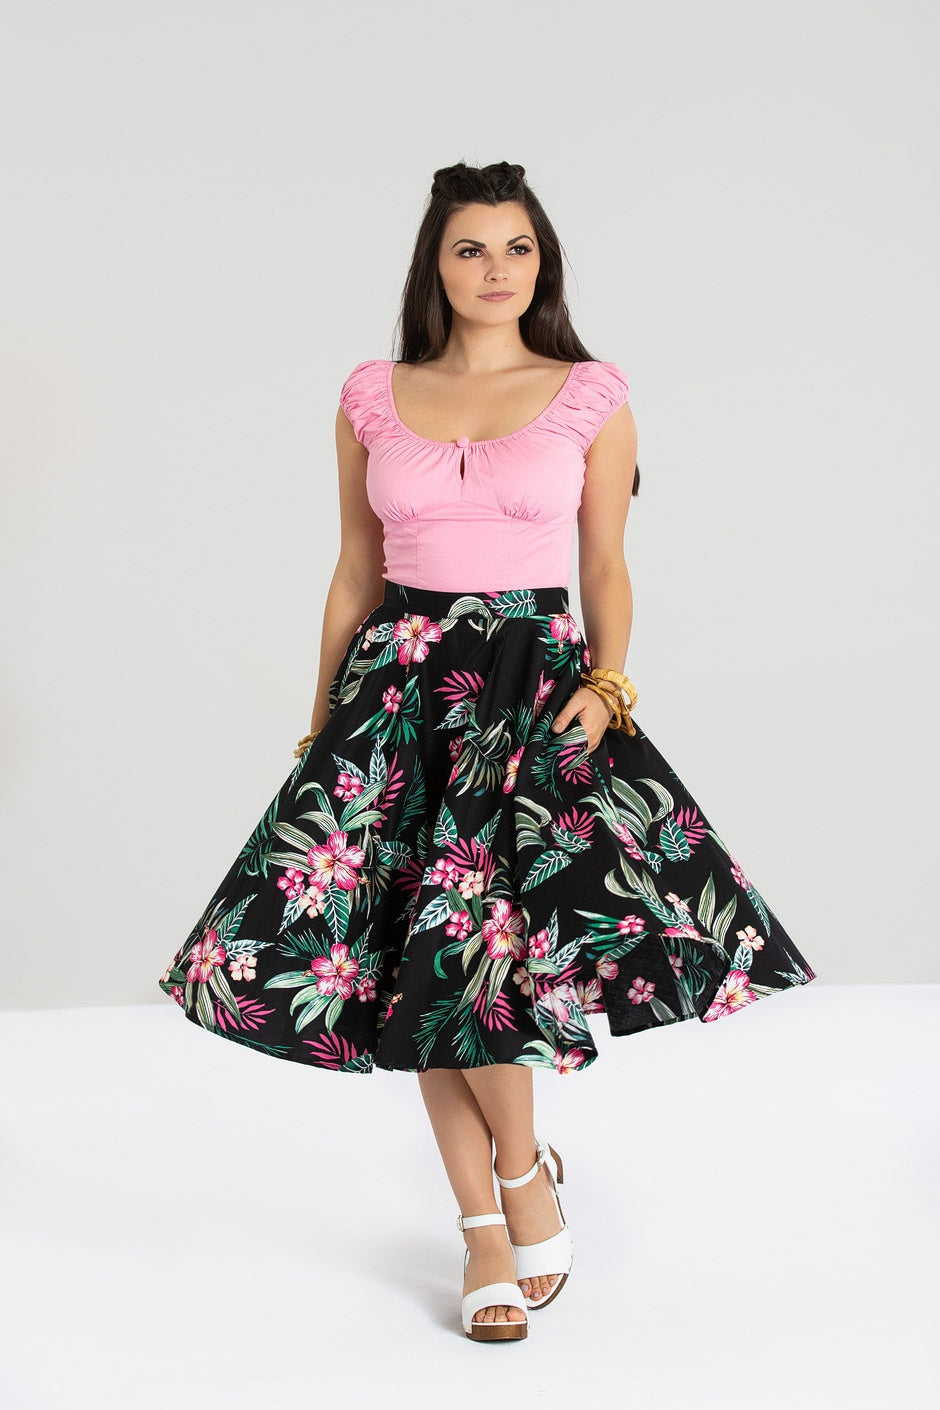 Dark haired girl wearing a short sleeve pink top and pink and black floral print skirt 